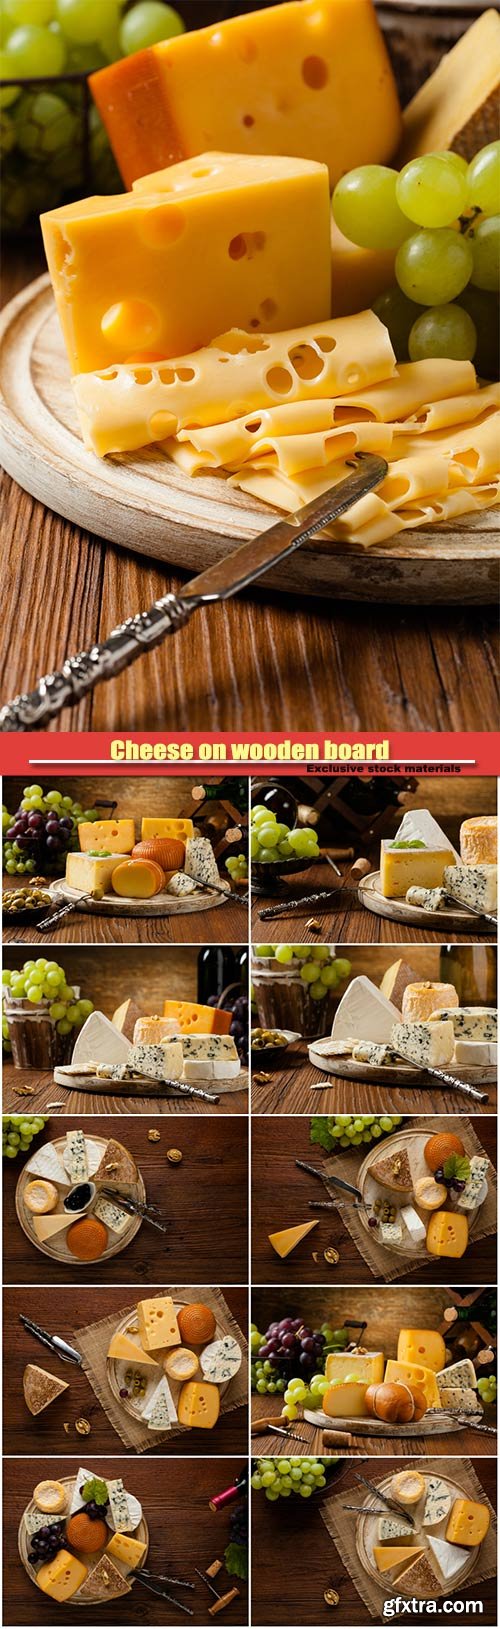 Cheese on wooden board